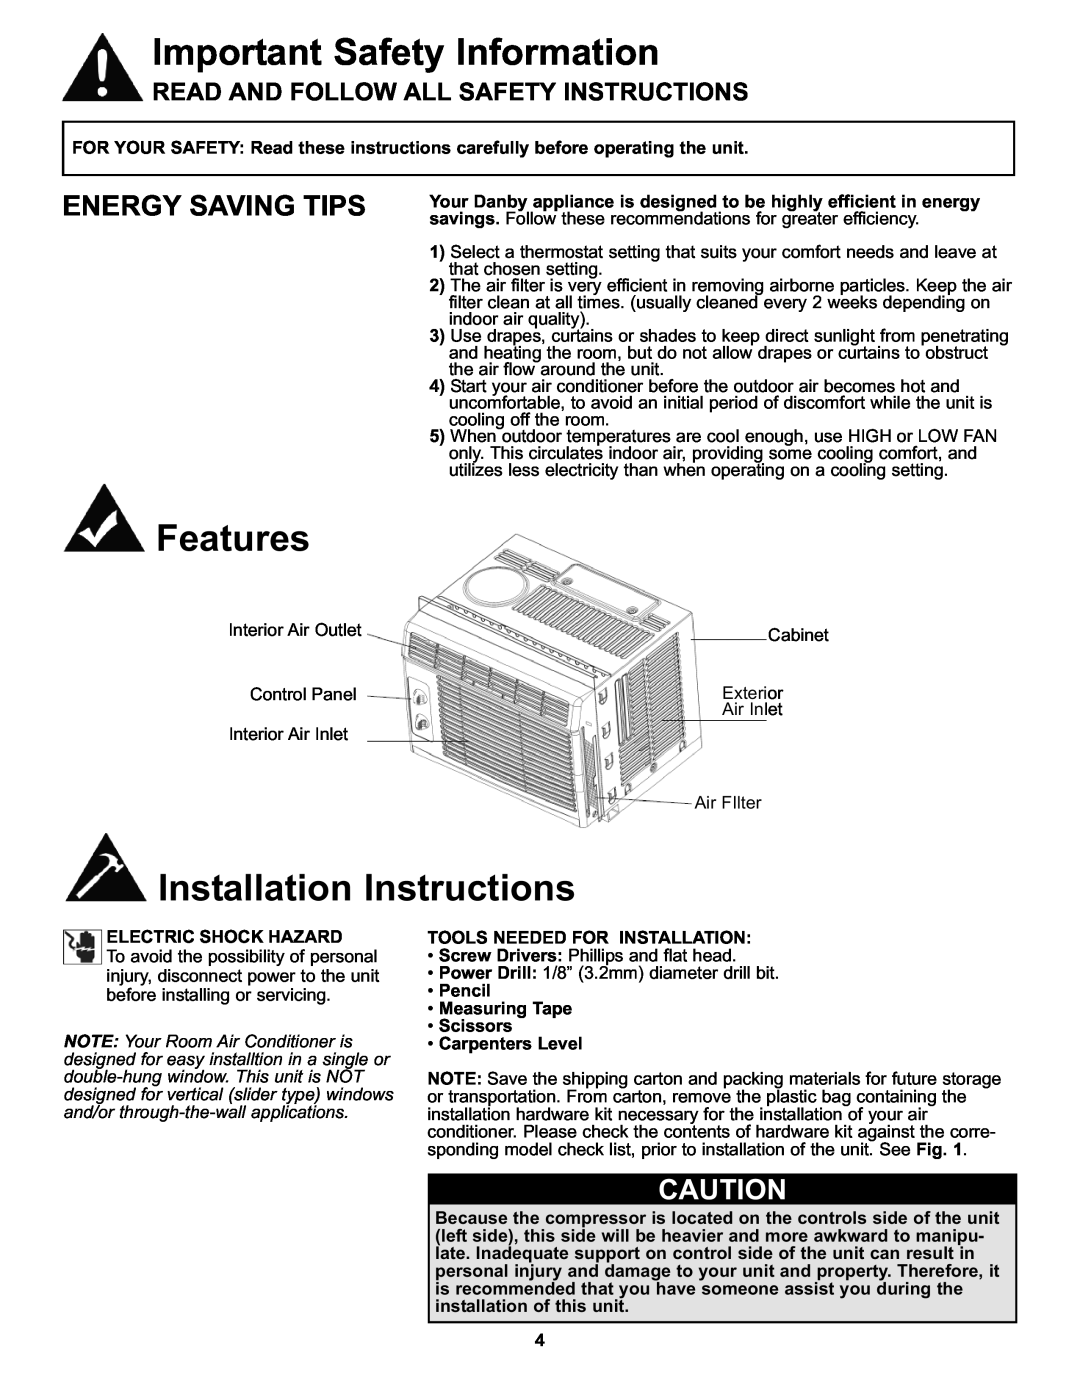 Danby DAC050MB1GB manual Features, Installation Instructions, Energy Saving Tips, Electric Shock Hazard, Carpenters Level 